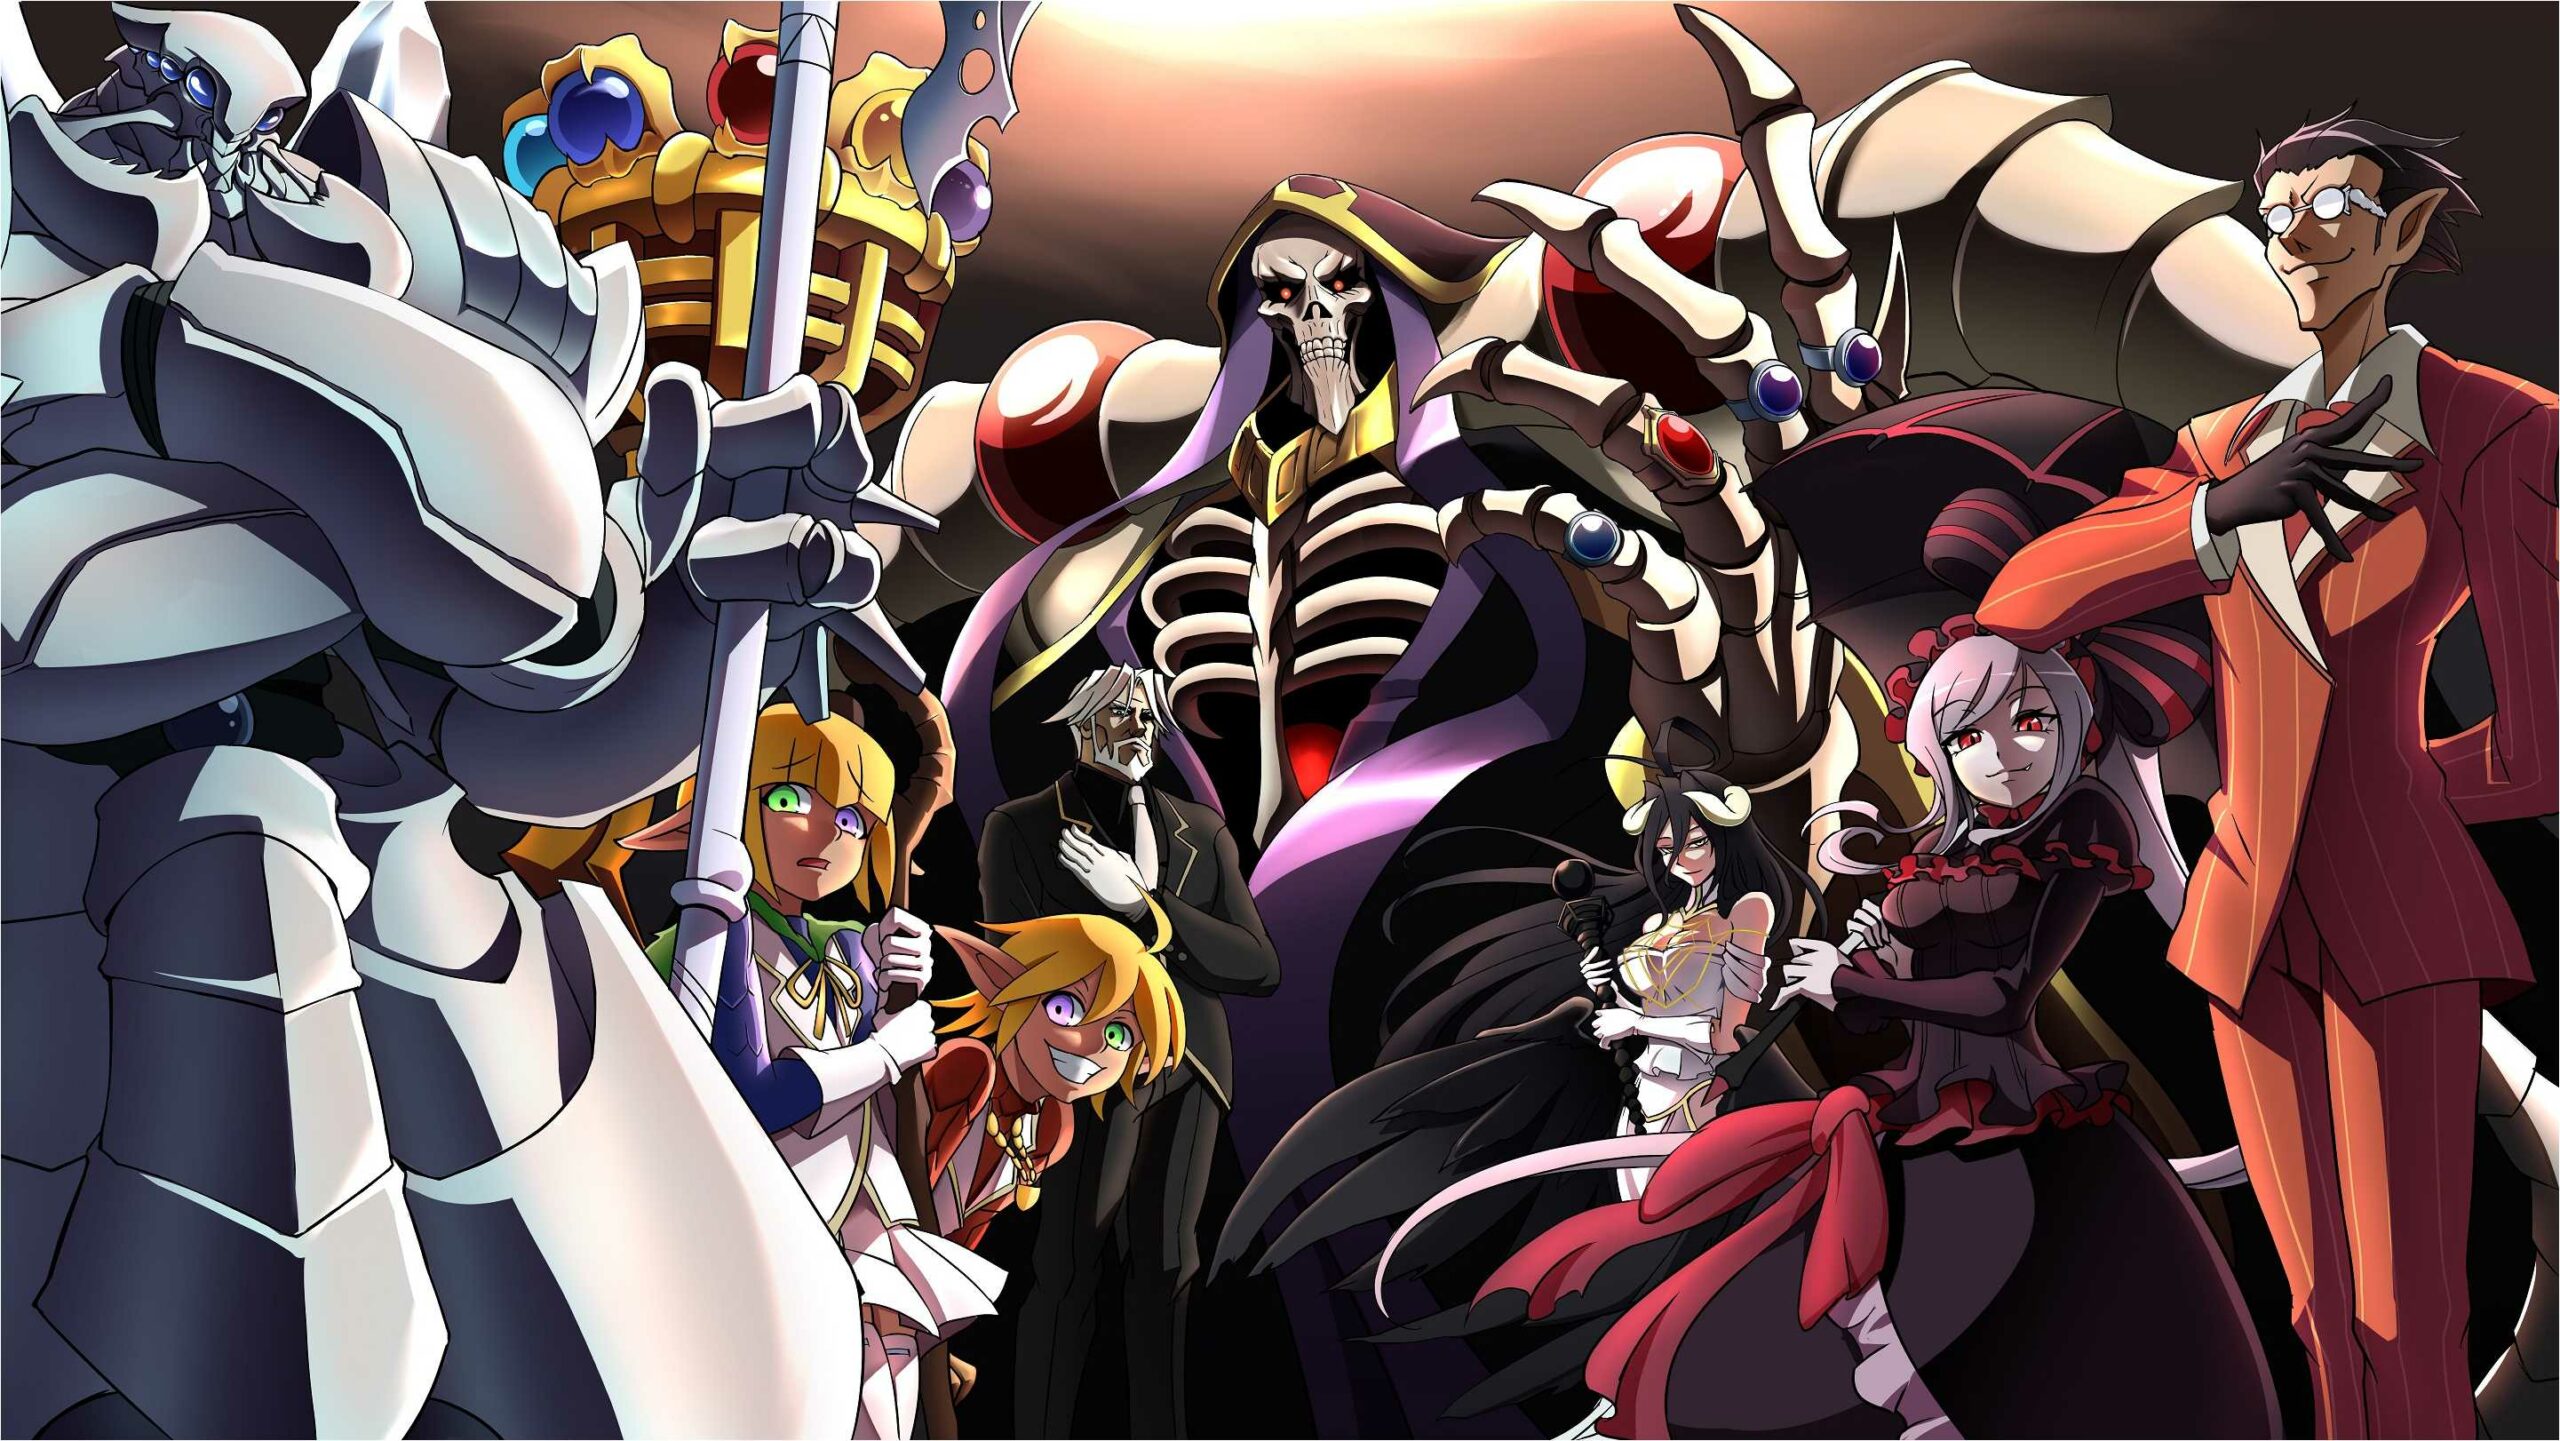 Overlord Season 5 Watch Online, Release Date, Time, Cast, Plotline, and More